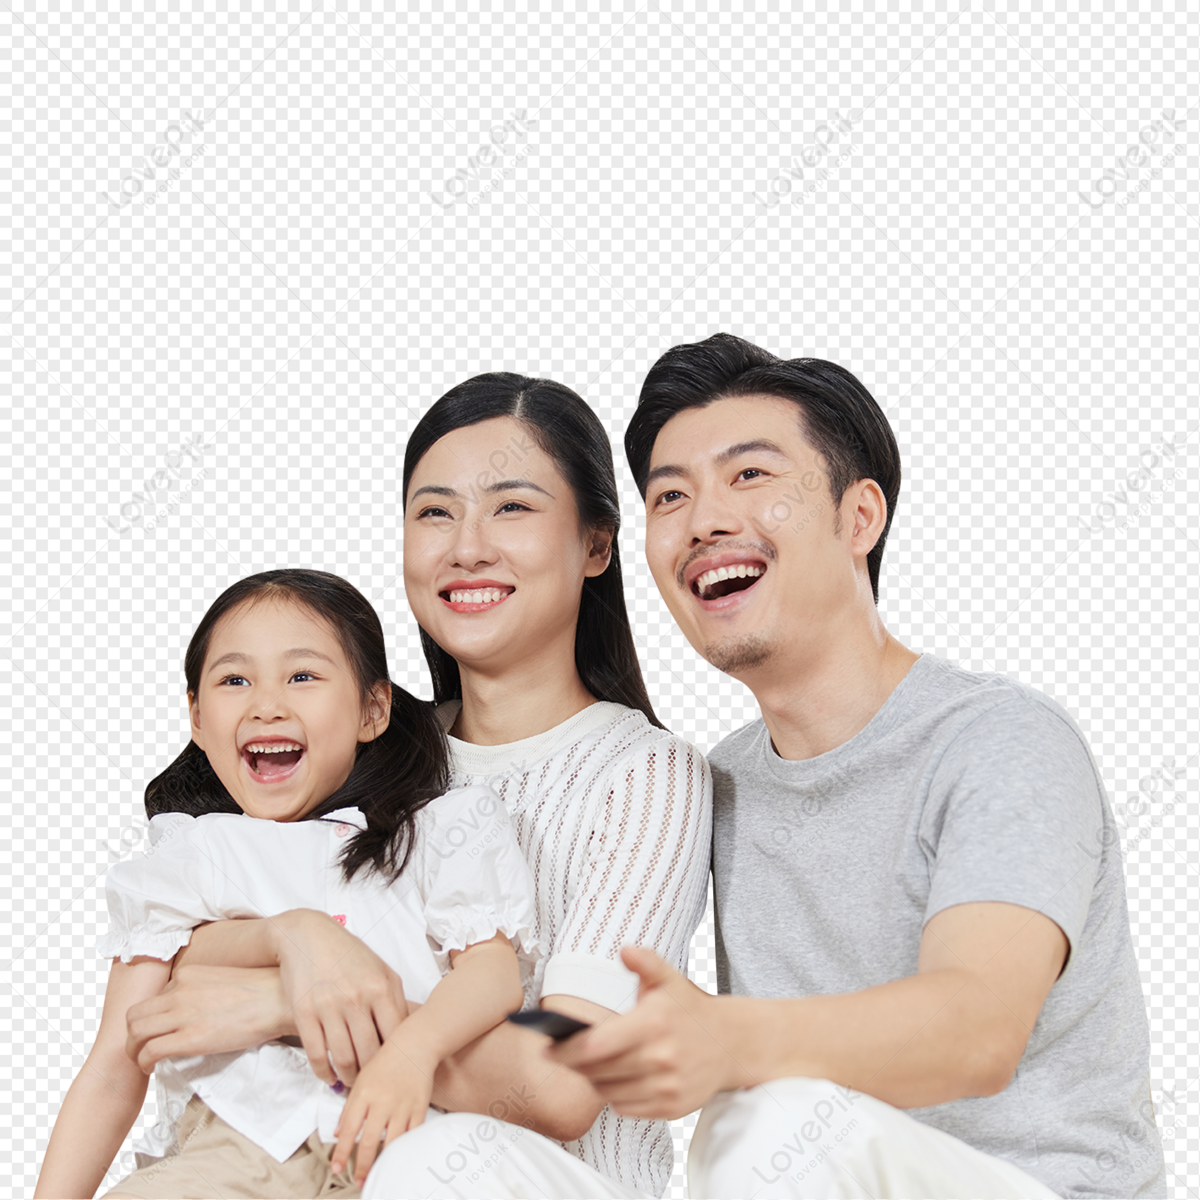 Happy Family Life Image PNG Picture And Clipart Image For Free Download -  Lovepik | 402006085